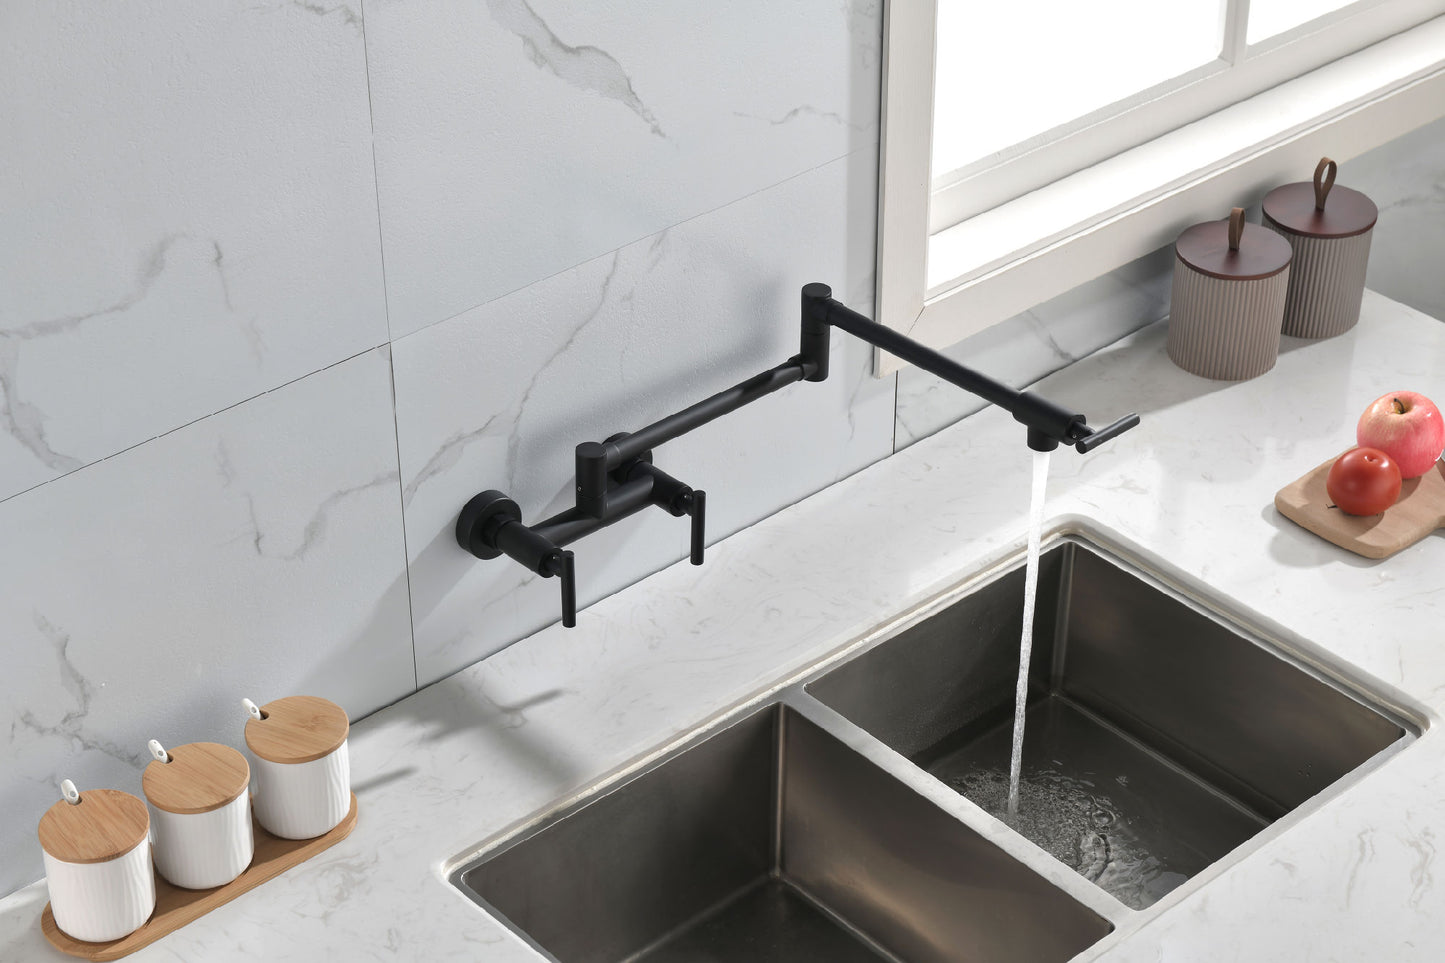 Pot Filler Faucets Both Hot Cold Water Wall Faucet Brass Faucets Kitchen Folding Kitchen Faucets Commercial Sink Faucet 3 Handles 2 Holes Joint Swing Arm Faucets